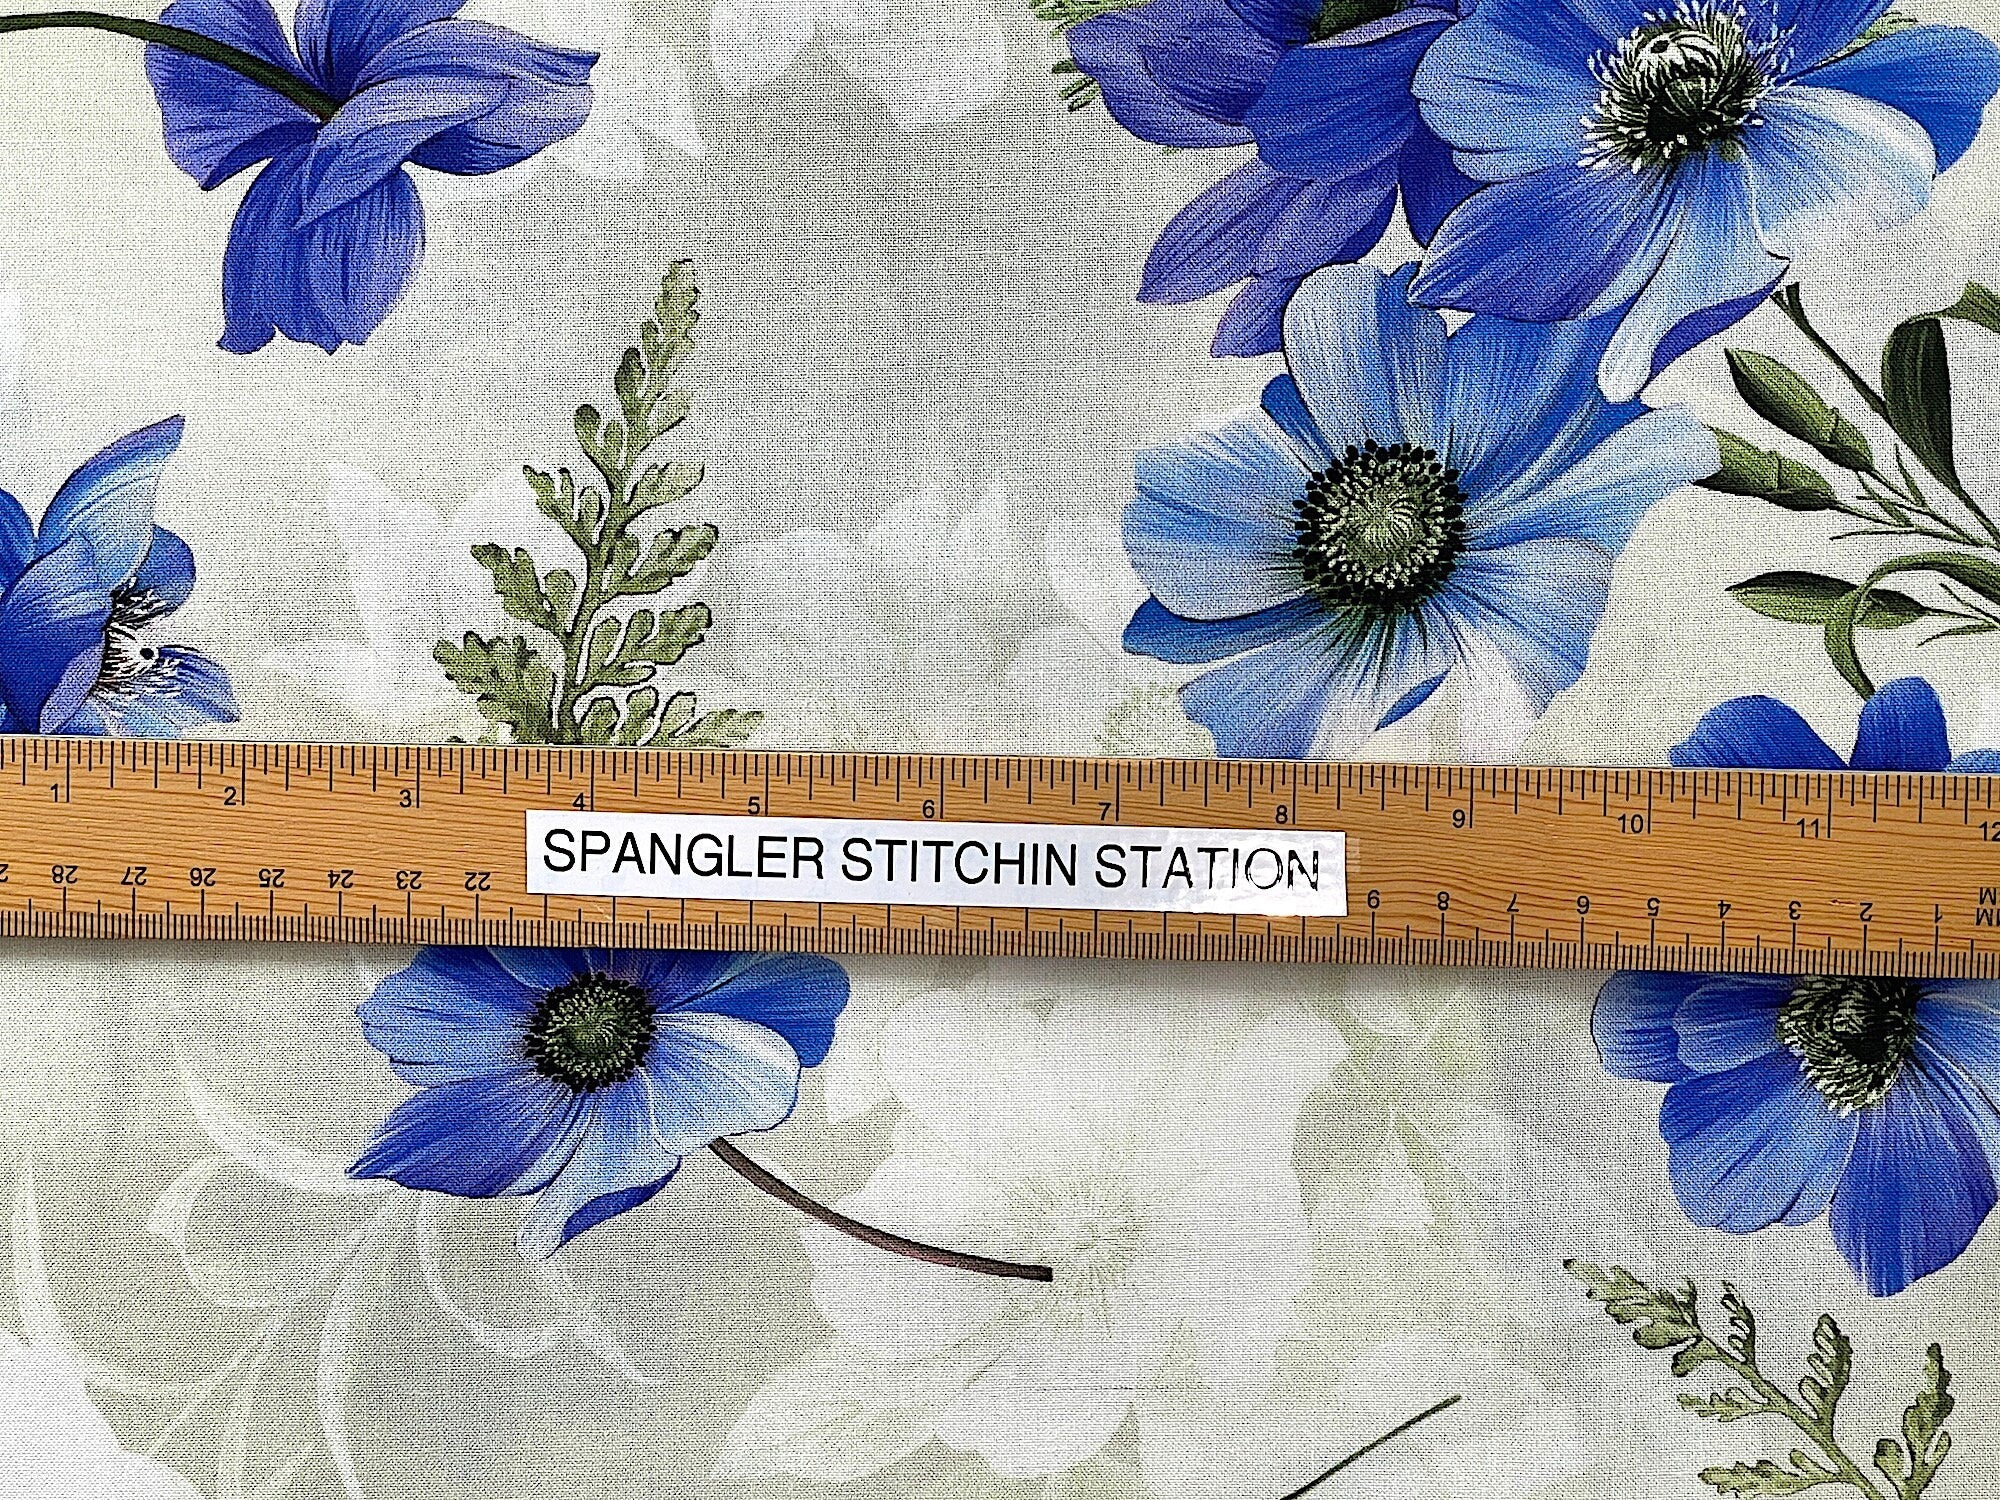 Ruler on fabric to show width